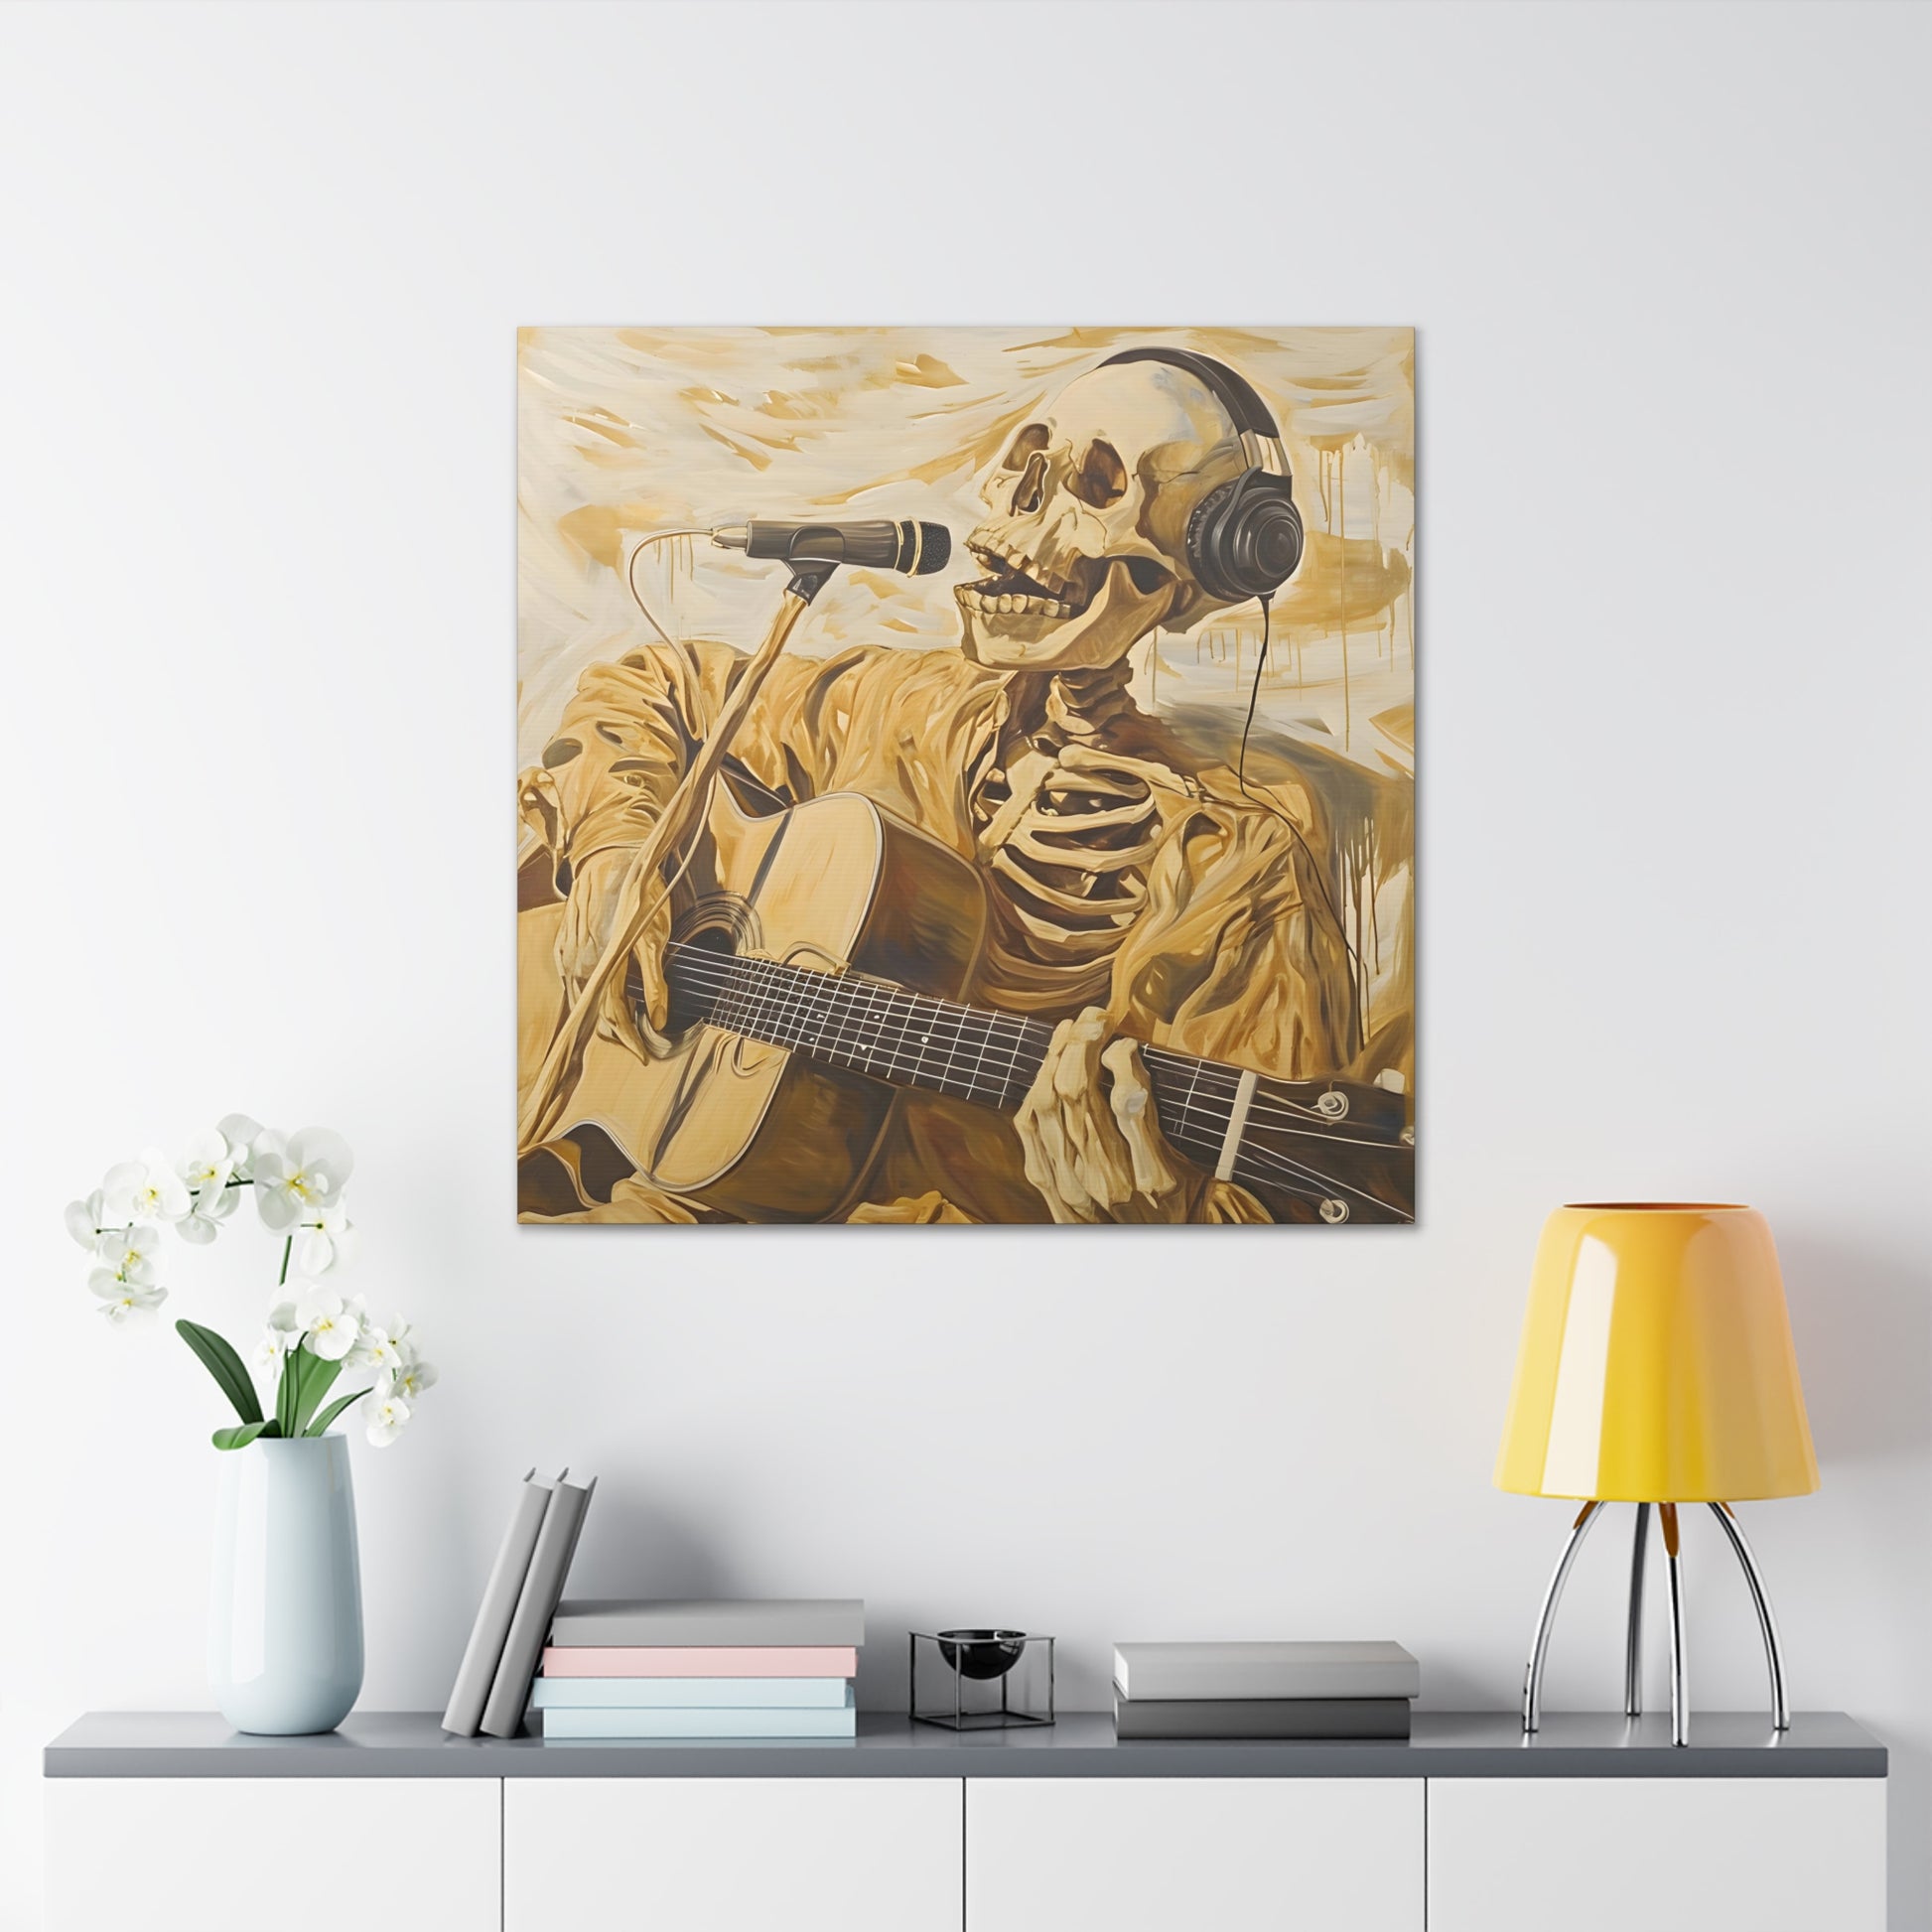 in siti 3 depicting a skeleton singing into a microphone, embodying music's redemptive power, inspired by 'American Pie' lyrics, with golden tones symbolizing music's sanctity